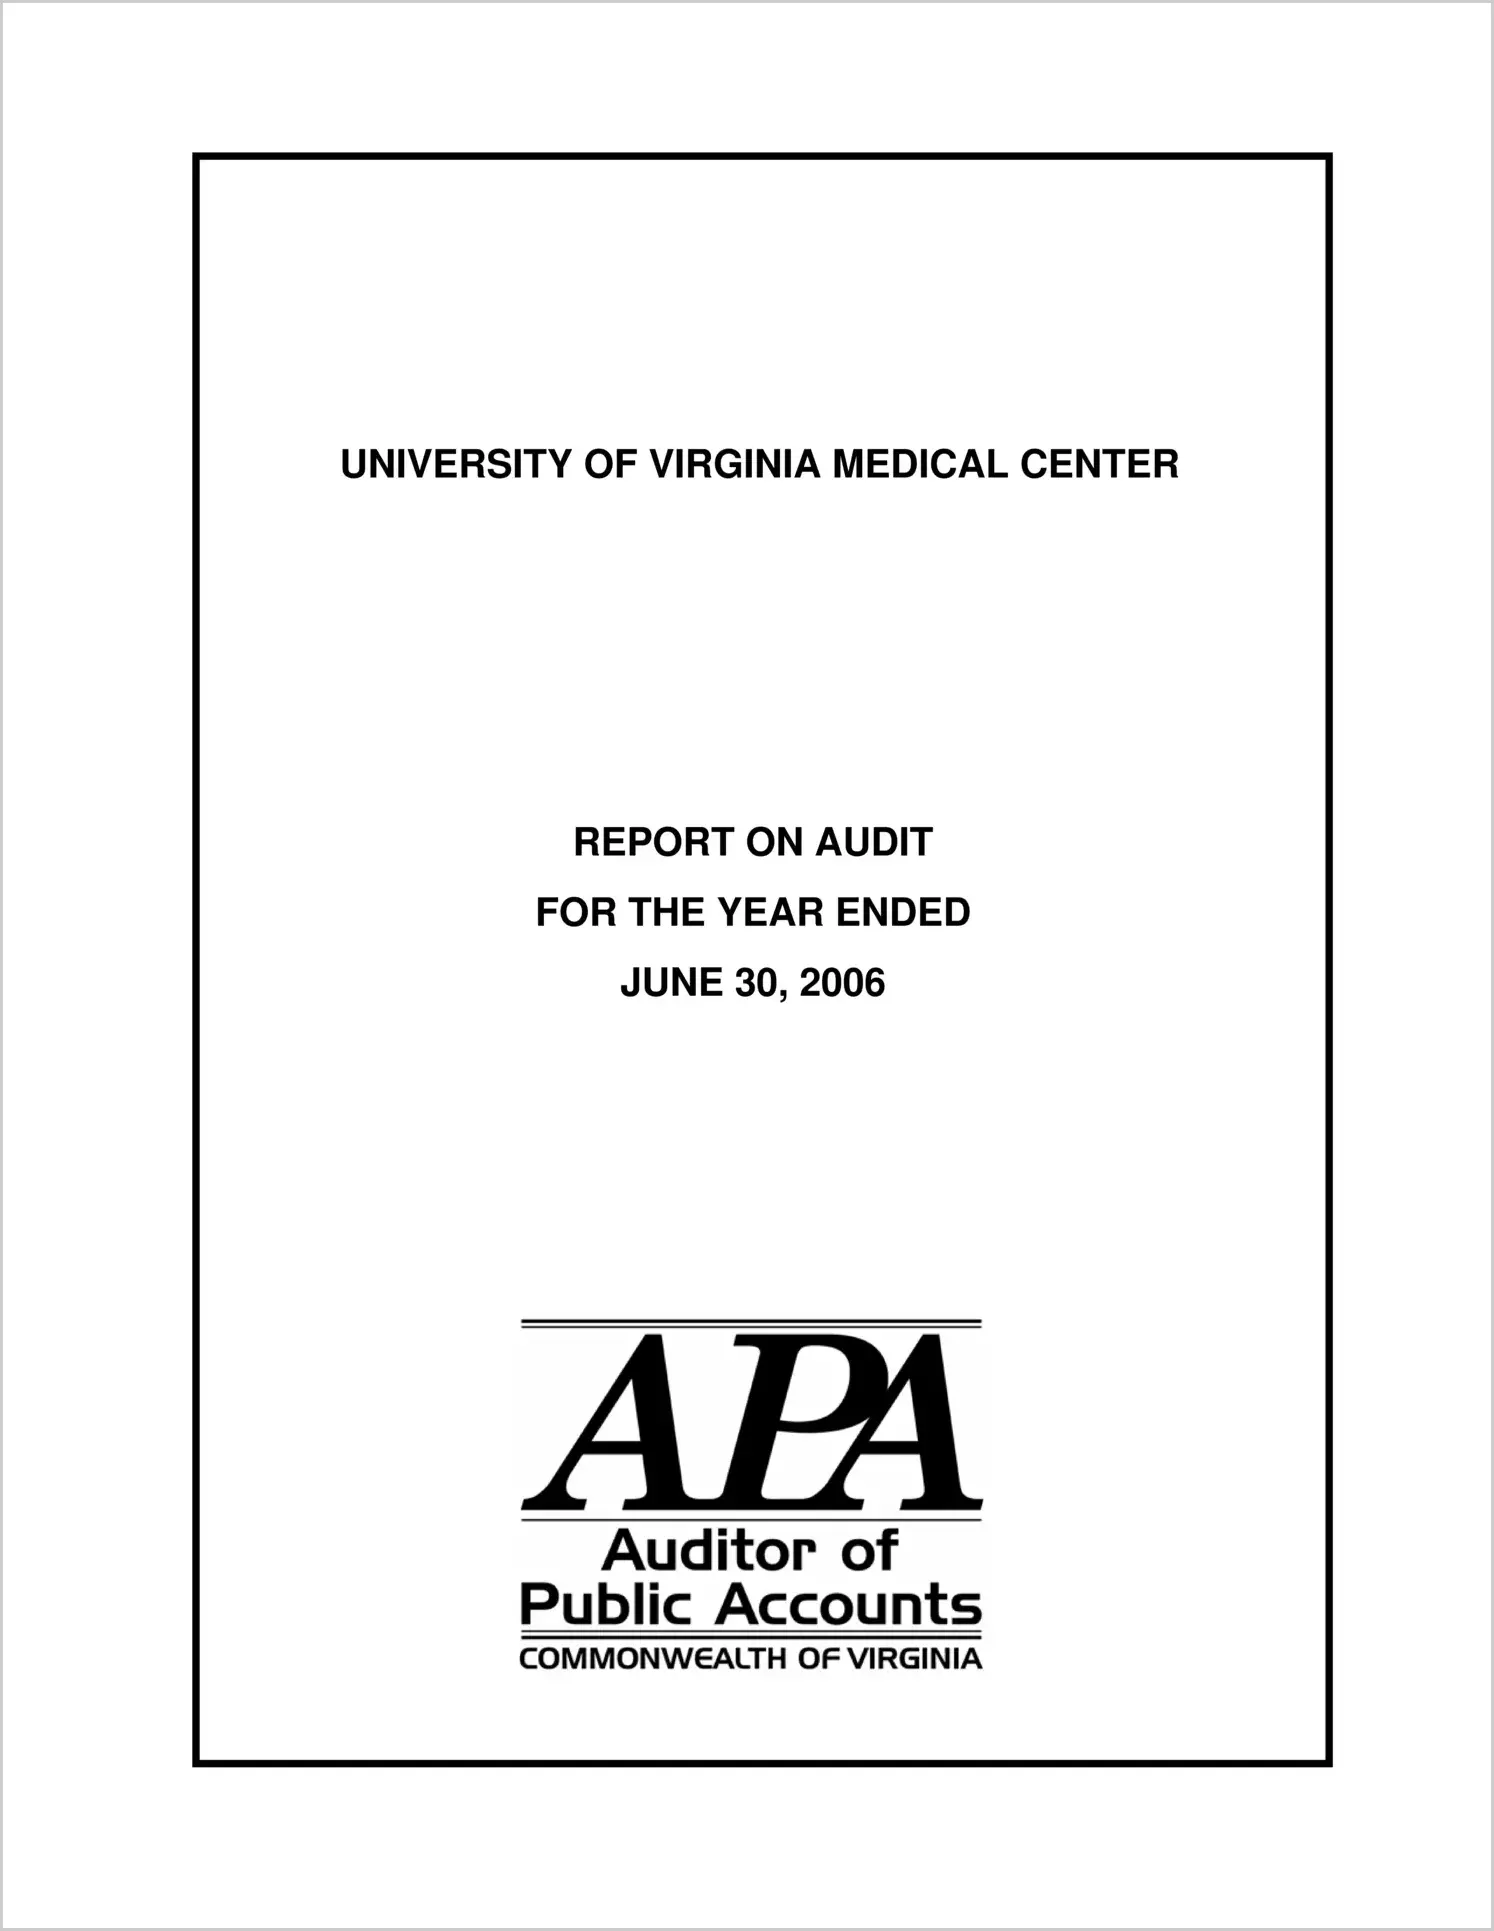 University of Virginia Medical Center for the year ended June 30, 2006